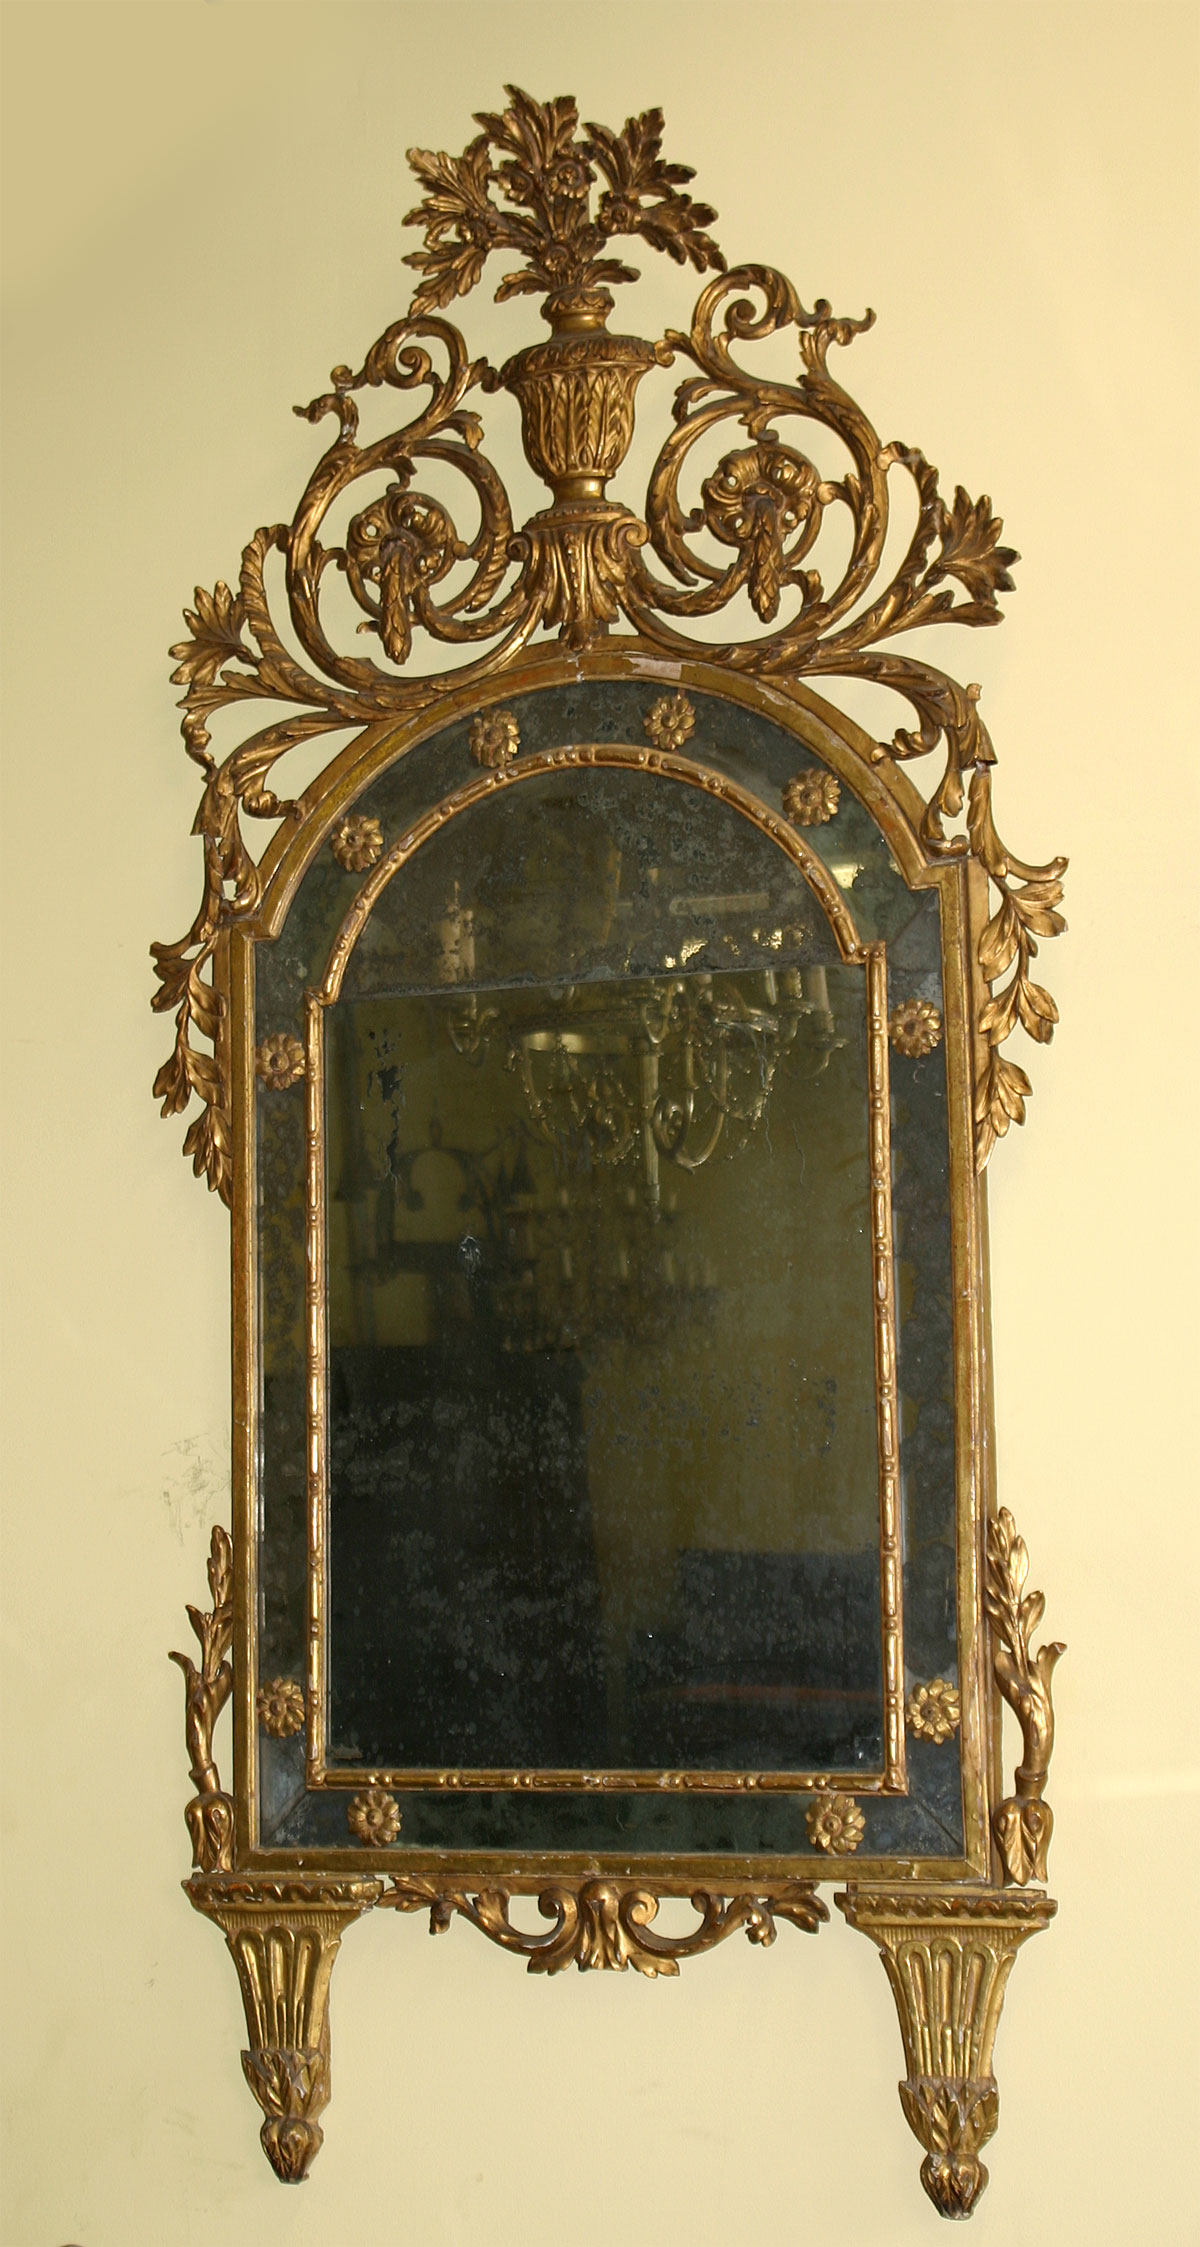 Pair of very fine, Italian, Neoclassical period, giltwood mirrors